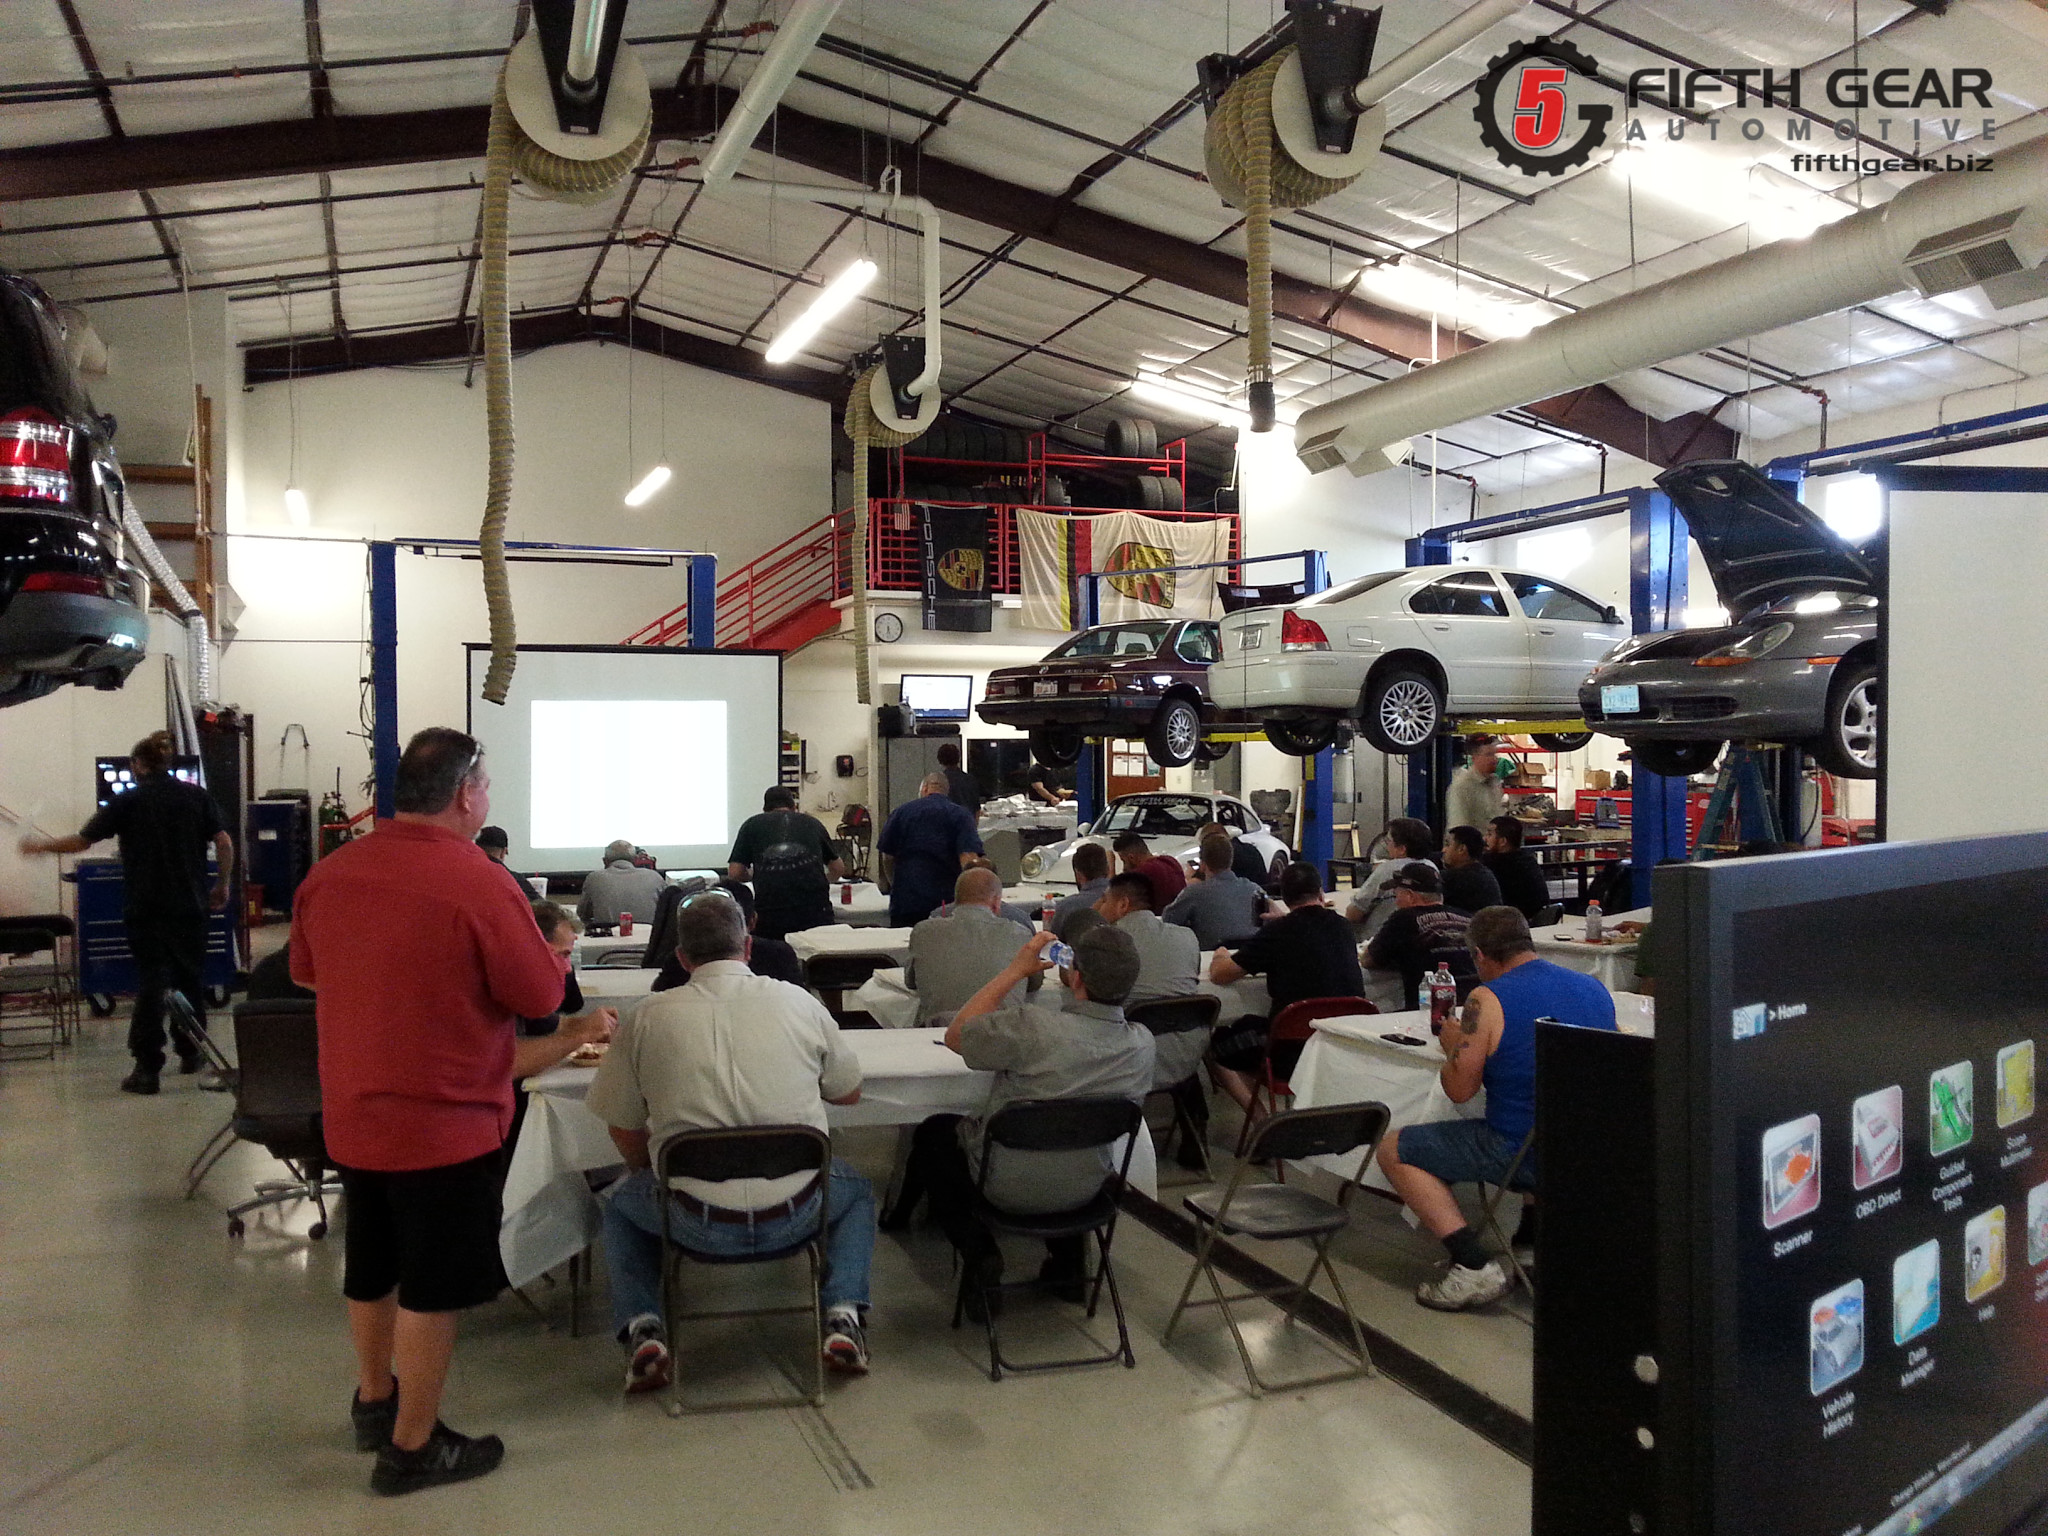 2048x1536 The Snap-On guys put on a great course and everyone agreed it was a big  success. We want to say thank you to Snap-On, Tommy (our local Snap-On  vendor), ...